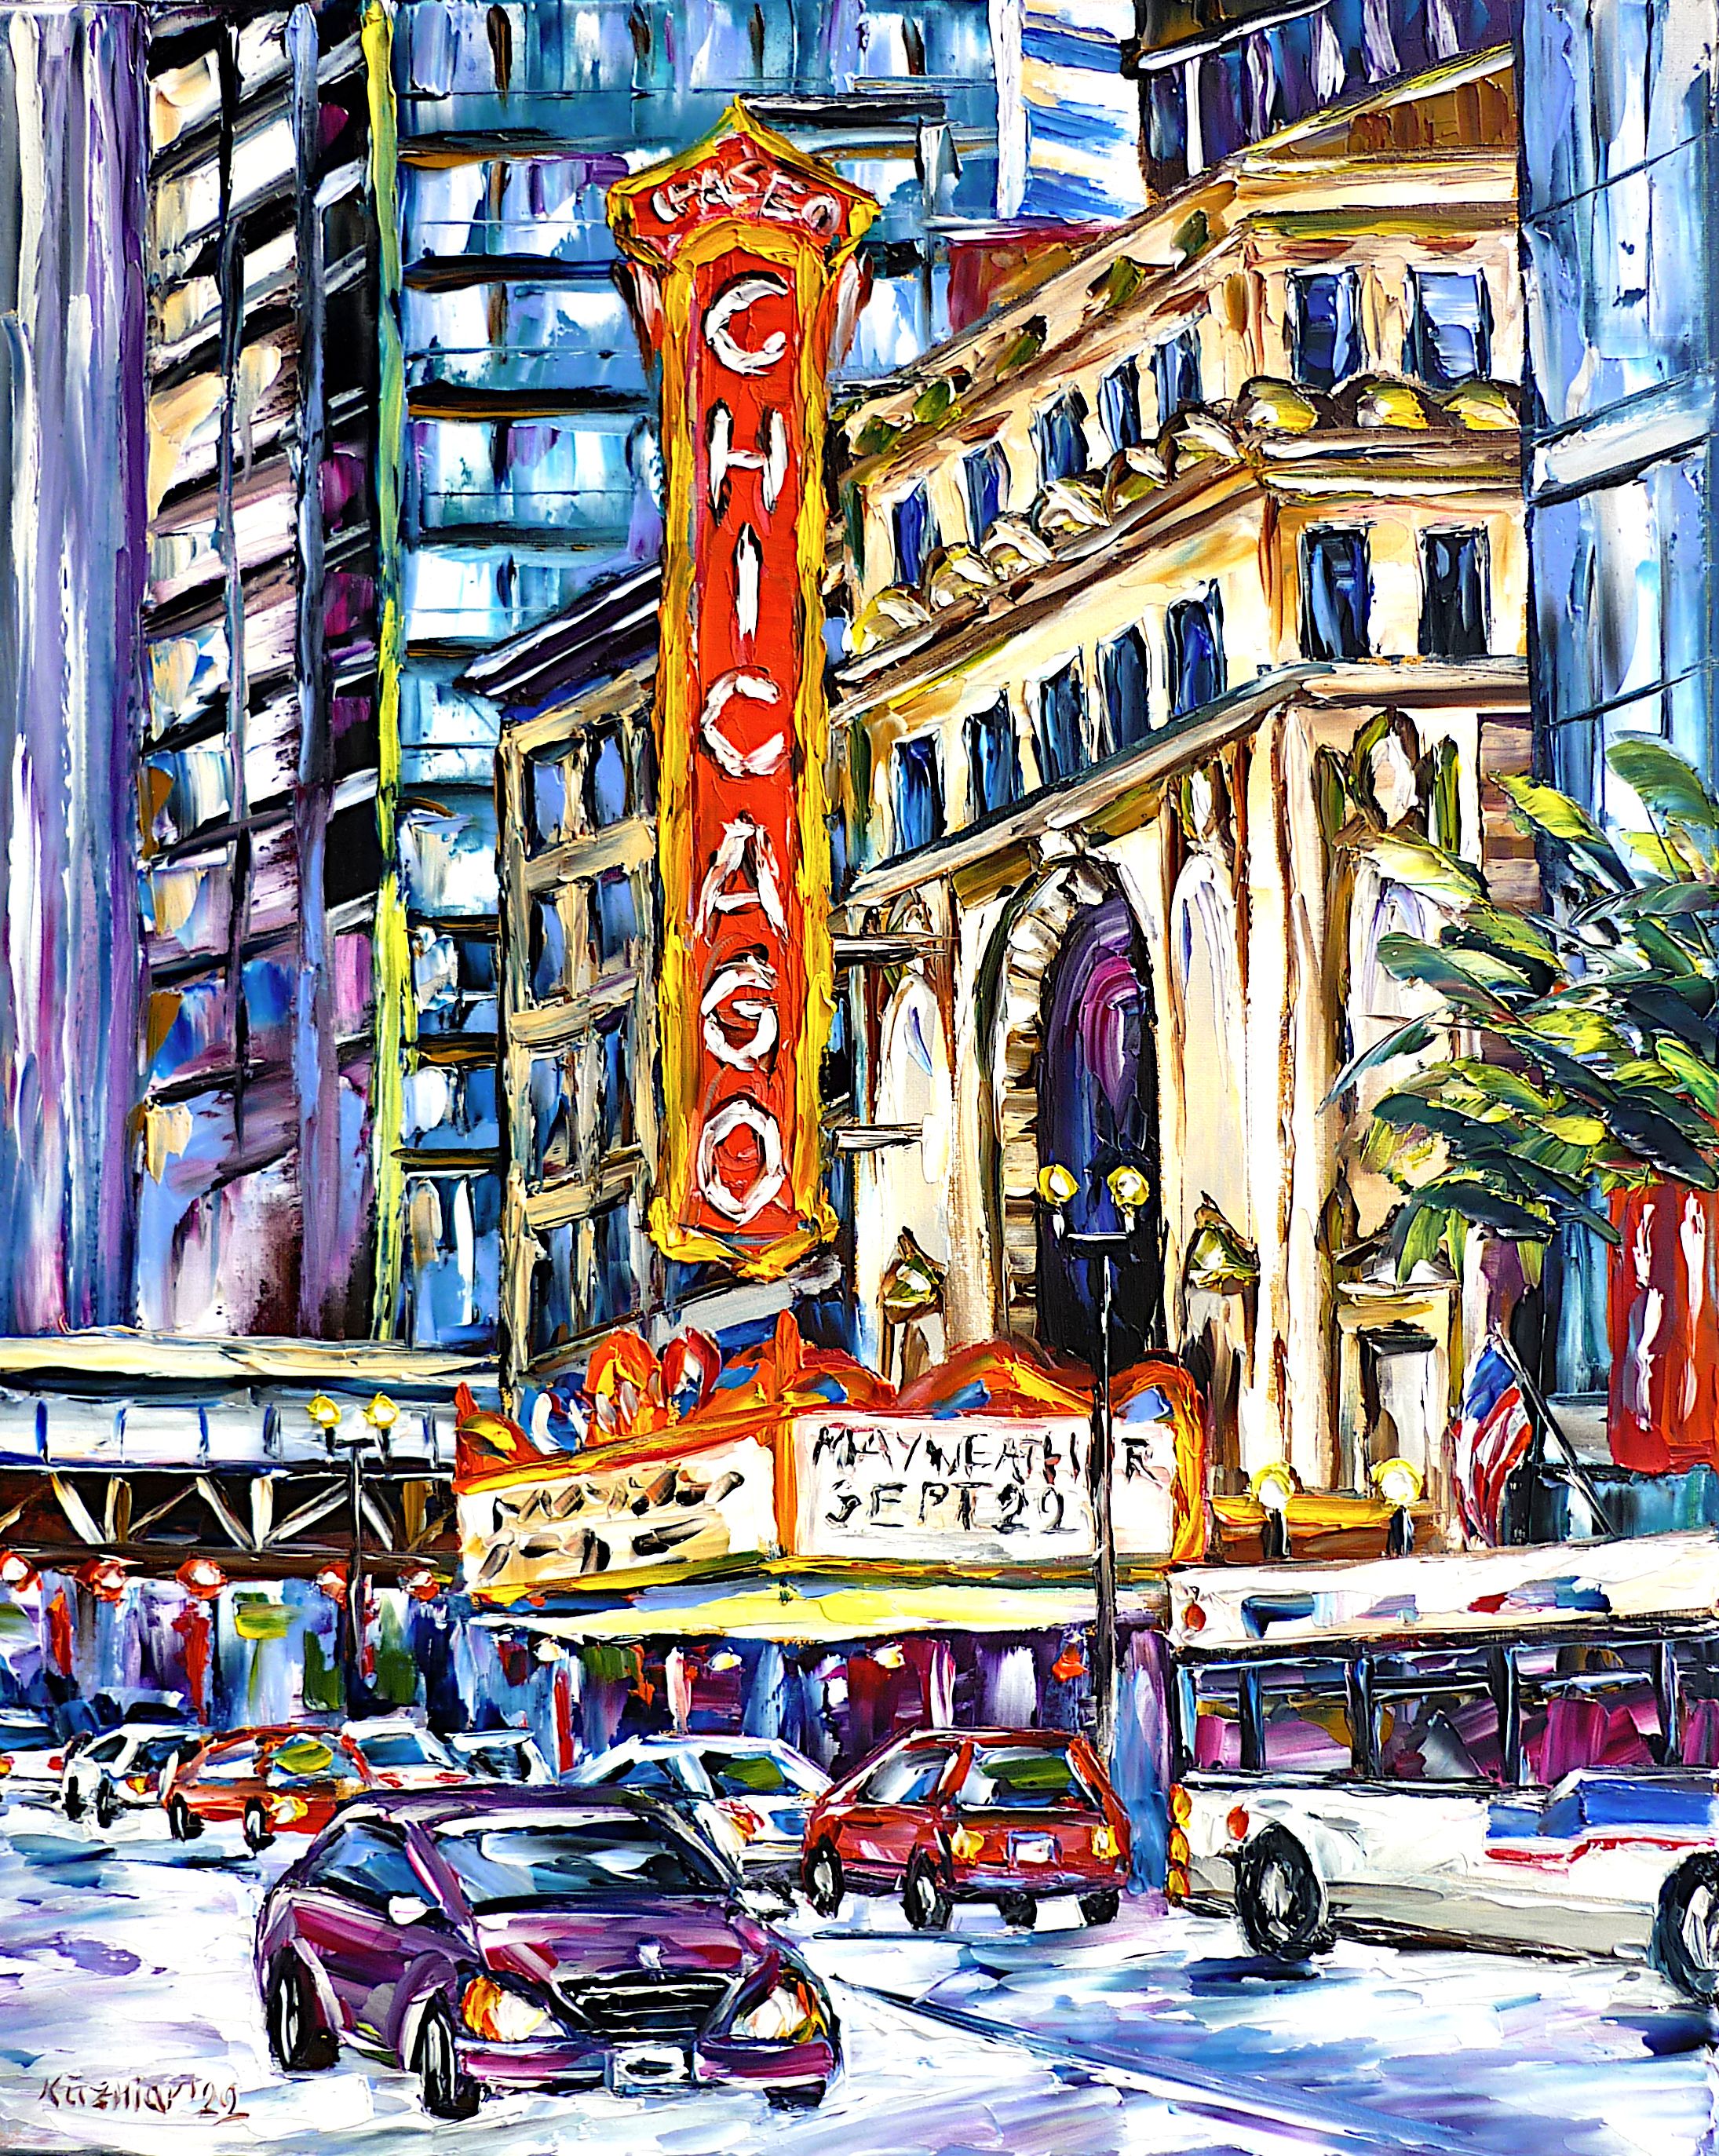 chicago theatre oil painting,chicago theater picture,chicago street scene,chicago city scene,streets of chicago,chicago cityscape,chicago road traffic,chicago cars,chicago bus,chicago state street,chicago buildings,chicago streetscape,us flag,flag of the united states of america,stars and stripes,chicago love,chicago lovers,i love chicago,chicago beauty,chicago alive,chicago life,chicago colorful,city life,chicago abstract,city theater,palette knife oil painting,modern art,impressionism,expressionism,abstract painting,lively colors,colorful painting,bright colors,light reflections,impasto painting,figurative